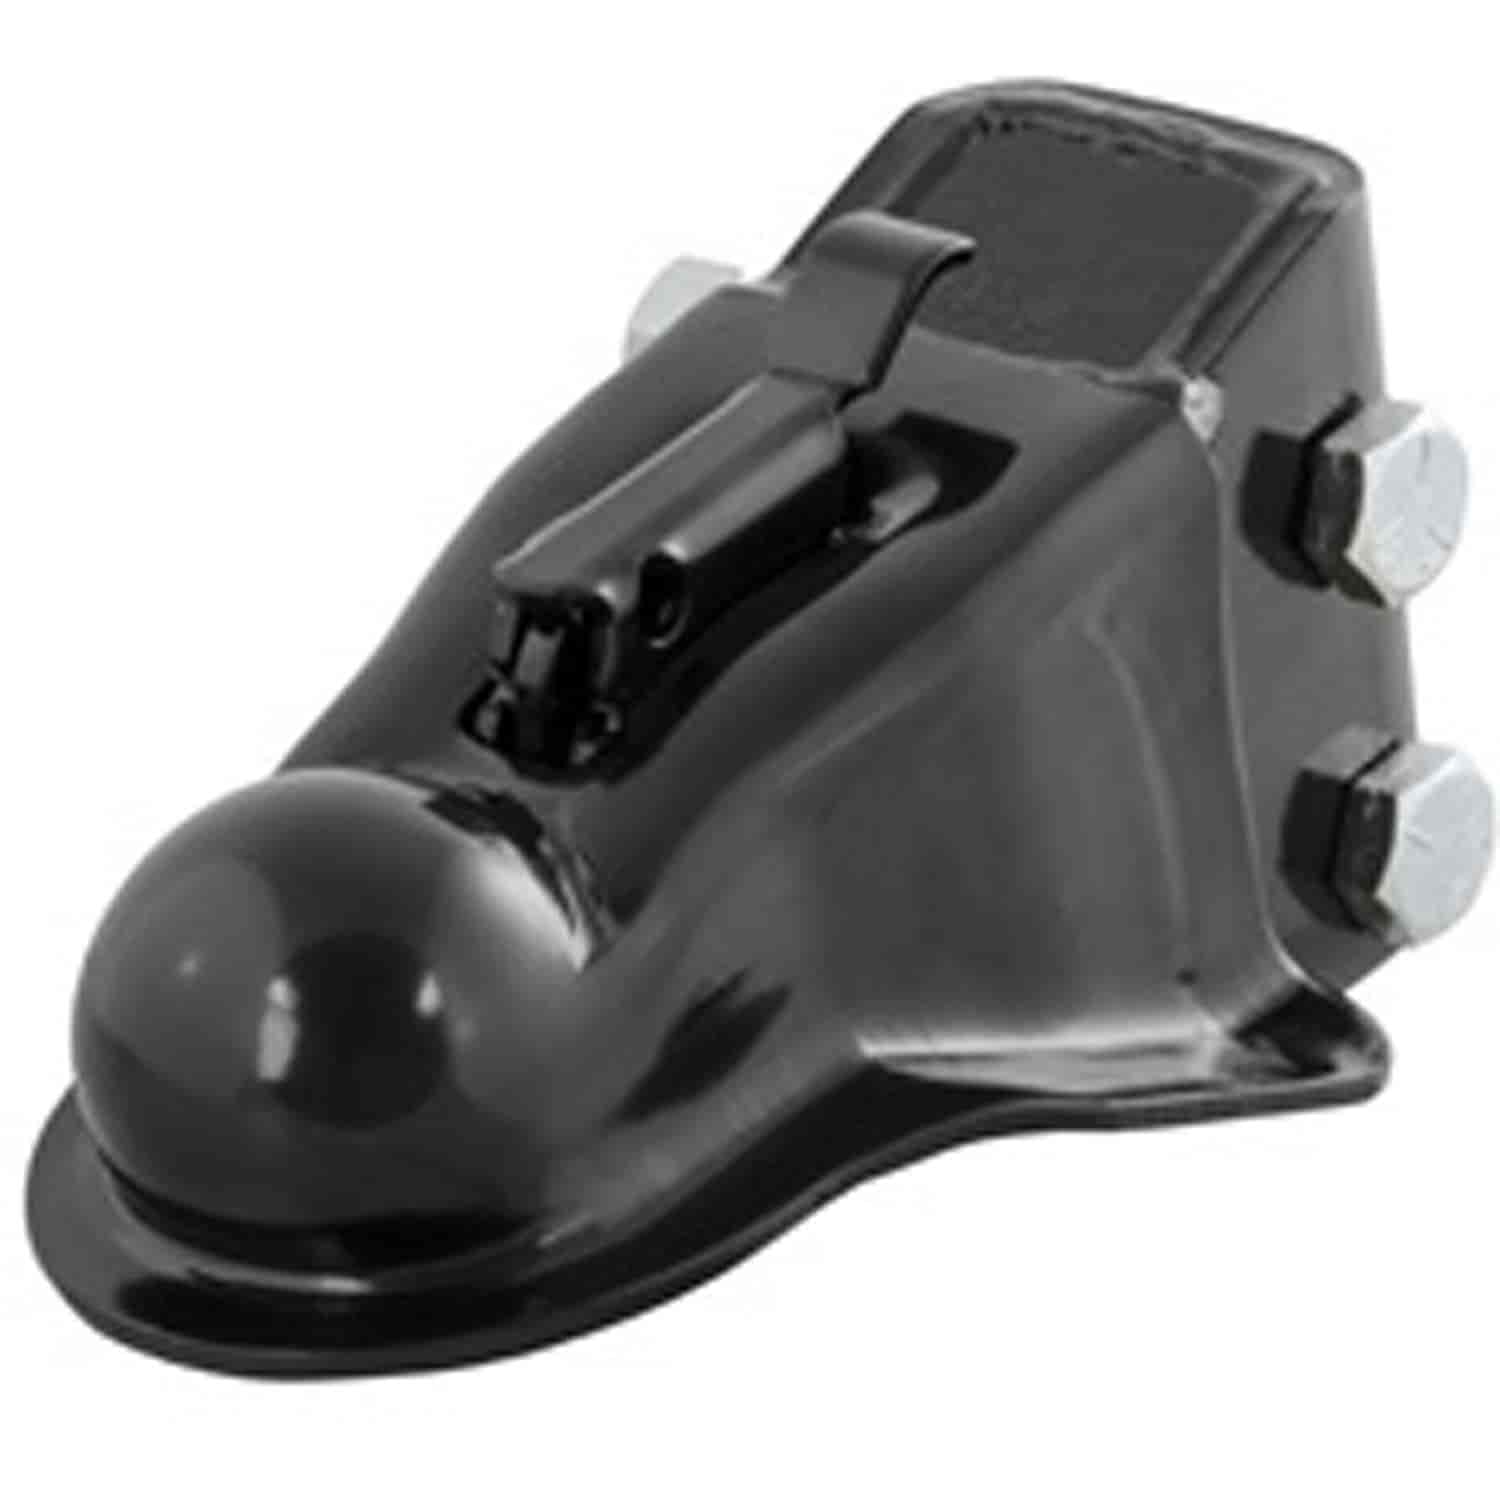 Channel-Mount Coupler with Easy Lock 14,000 lbs. Gross Trailer Weight, 2 5/16 in. Ball